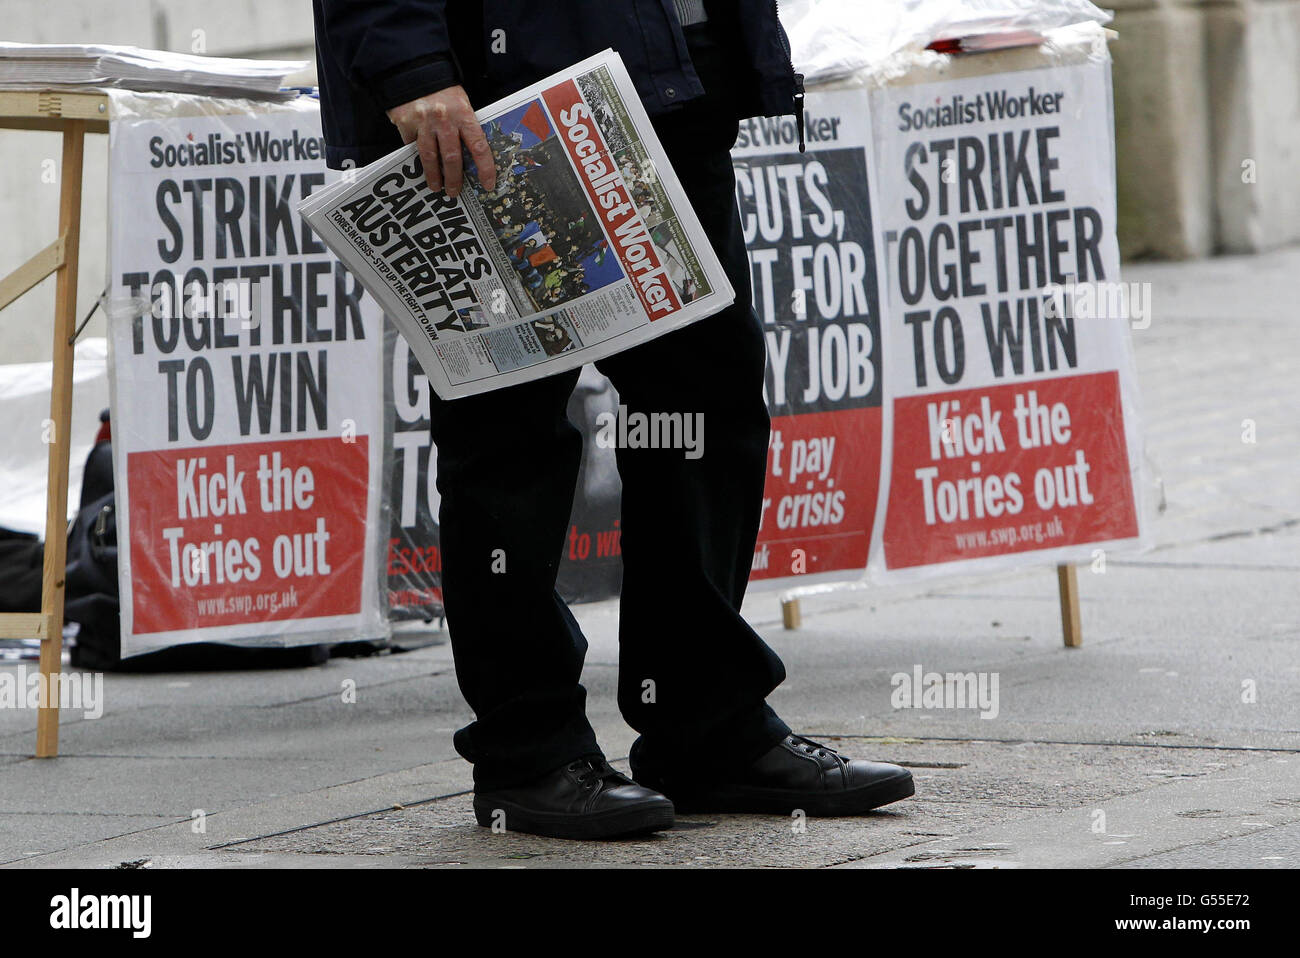 A demonstrator protests in Liverpool, as public sector workers go on strike in a row over pensions. Stock Photo